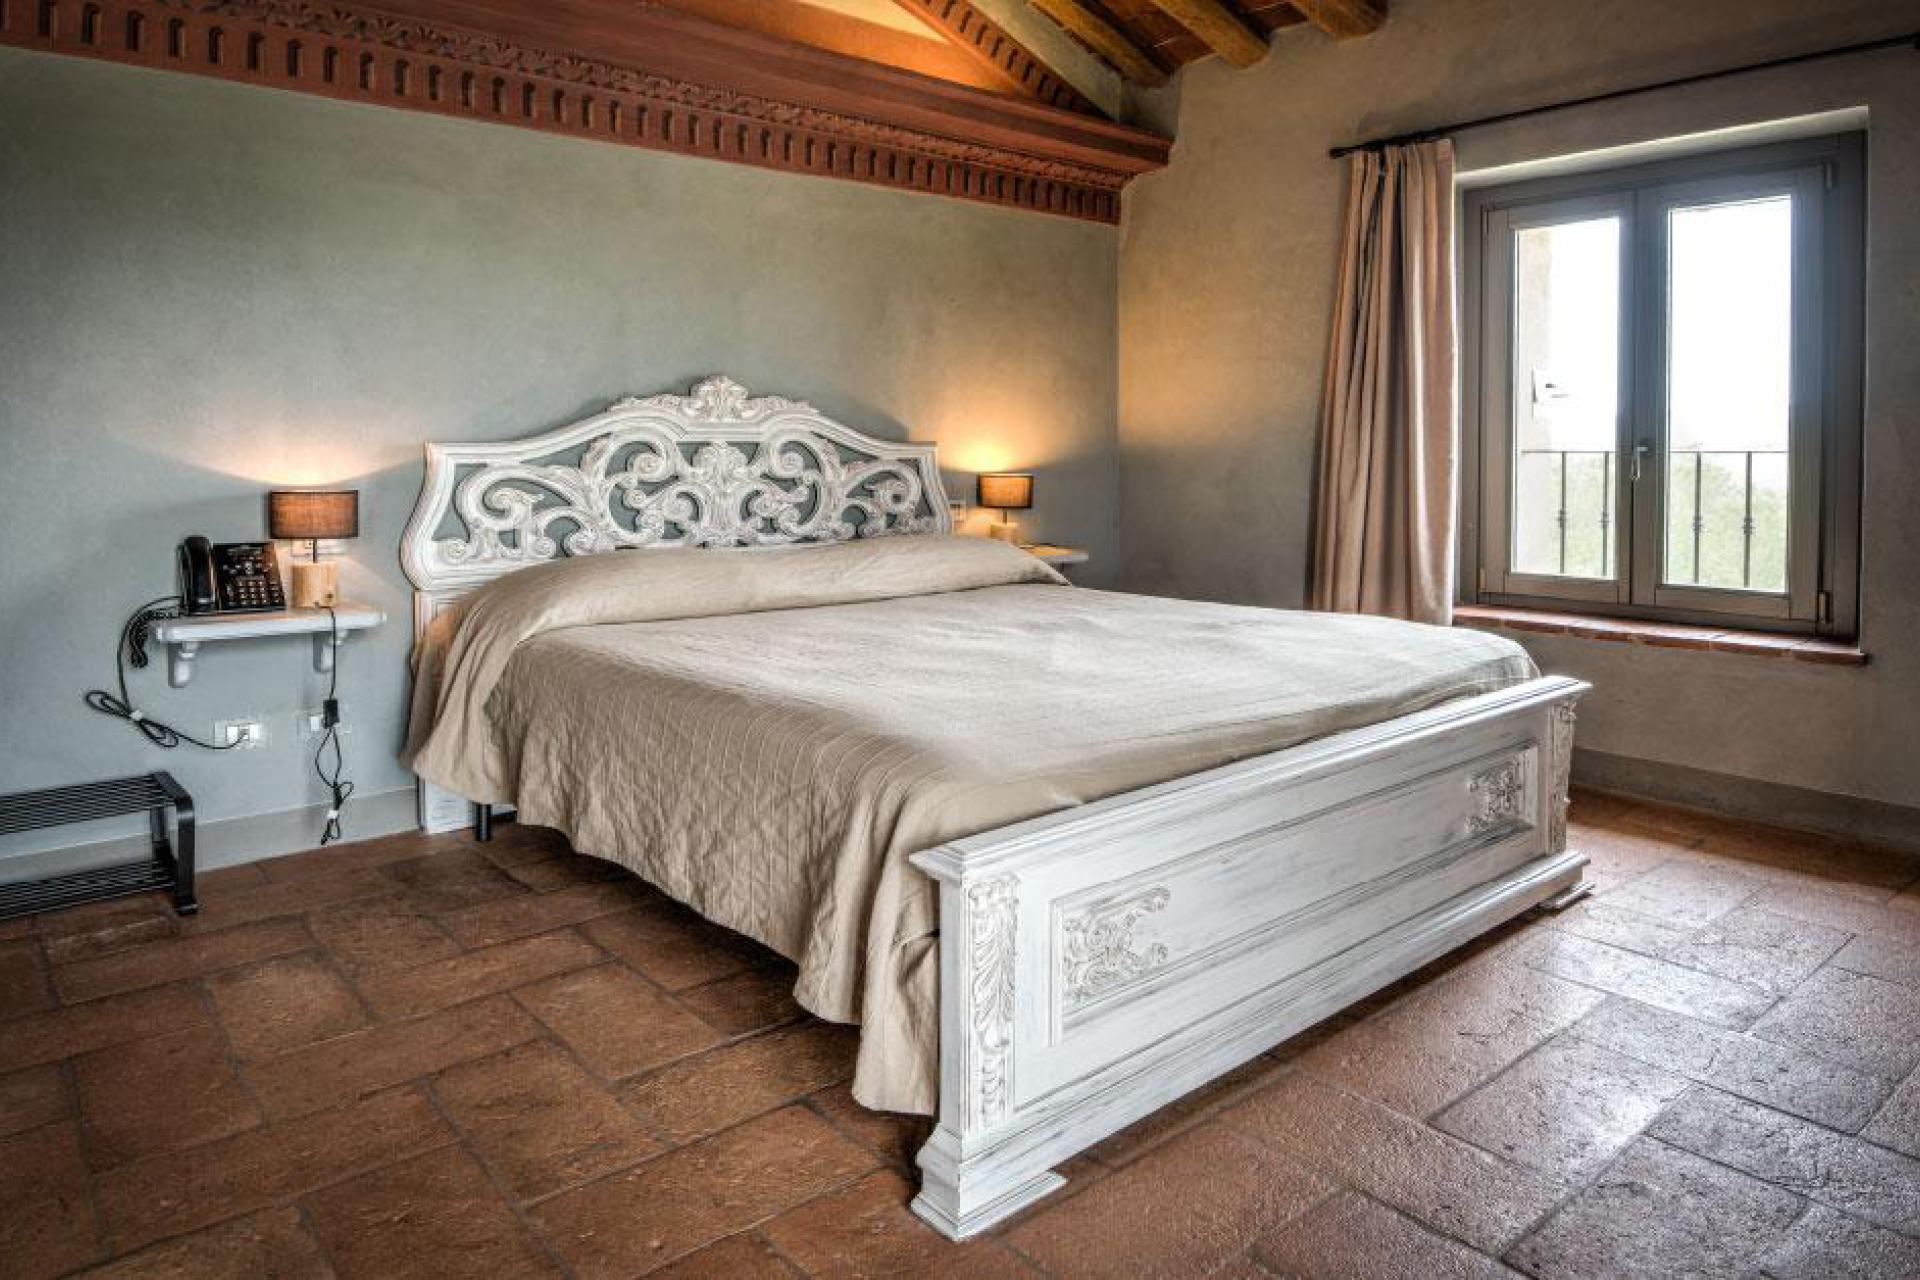 Agriturismo Piedmont Luxury agriturismo Piedmont, ideal for wine and food lovers